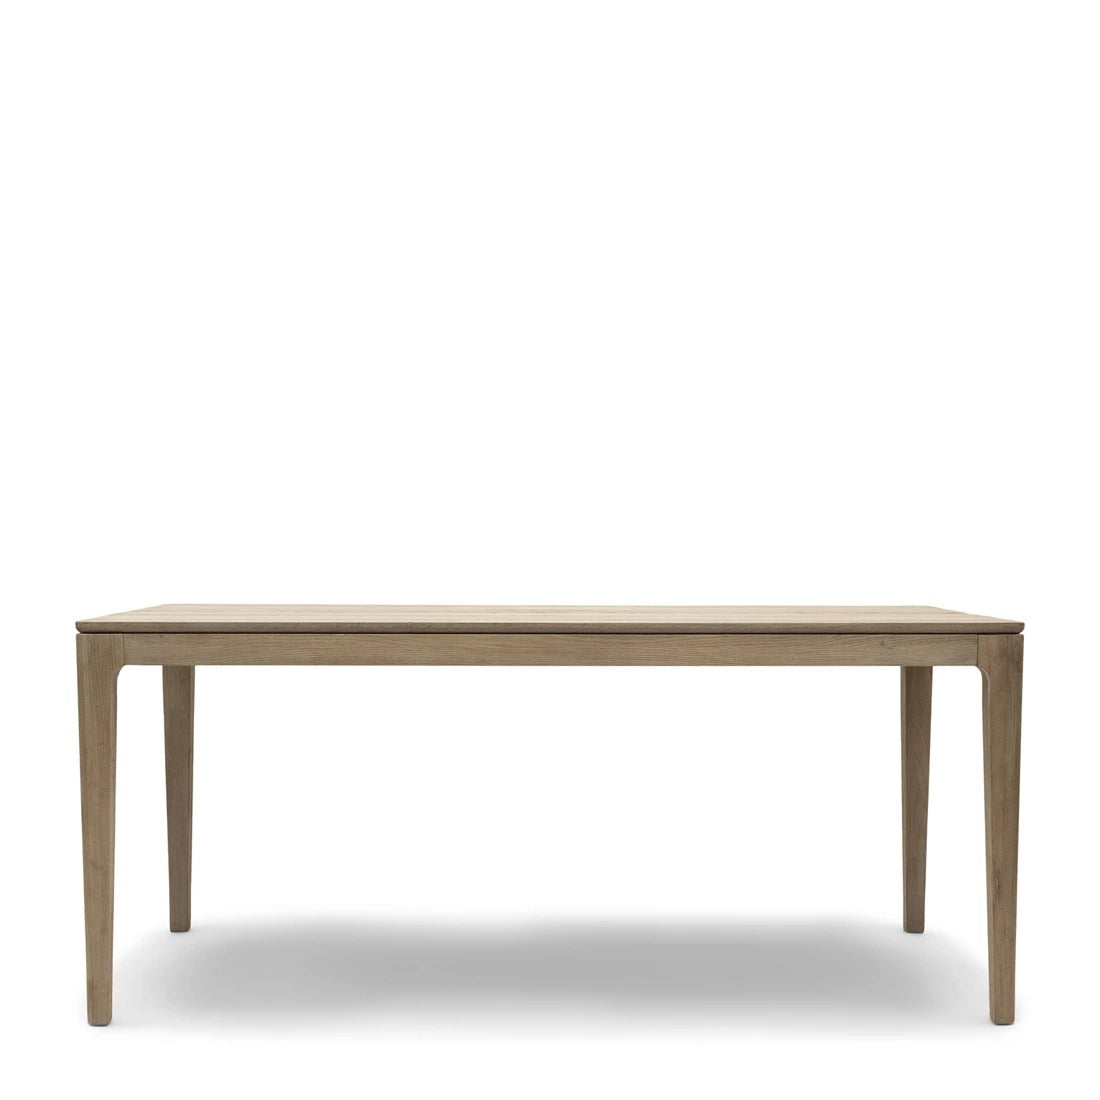 Imola dining table 180x90